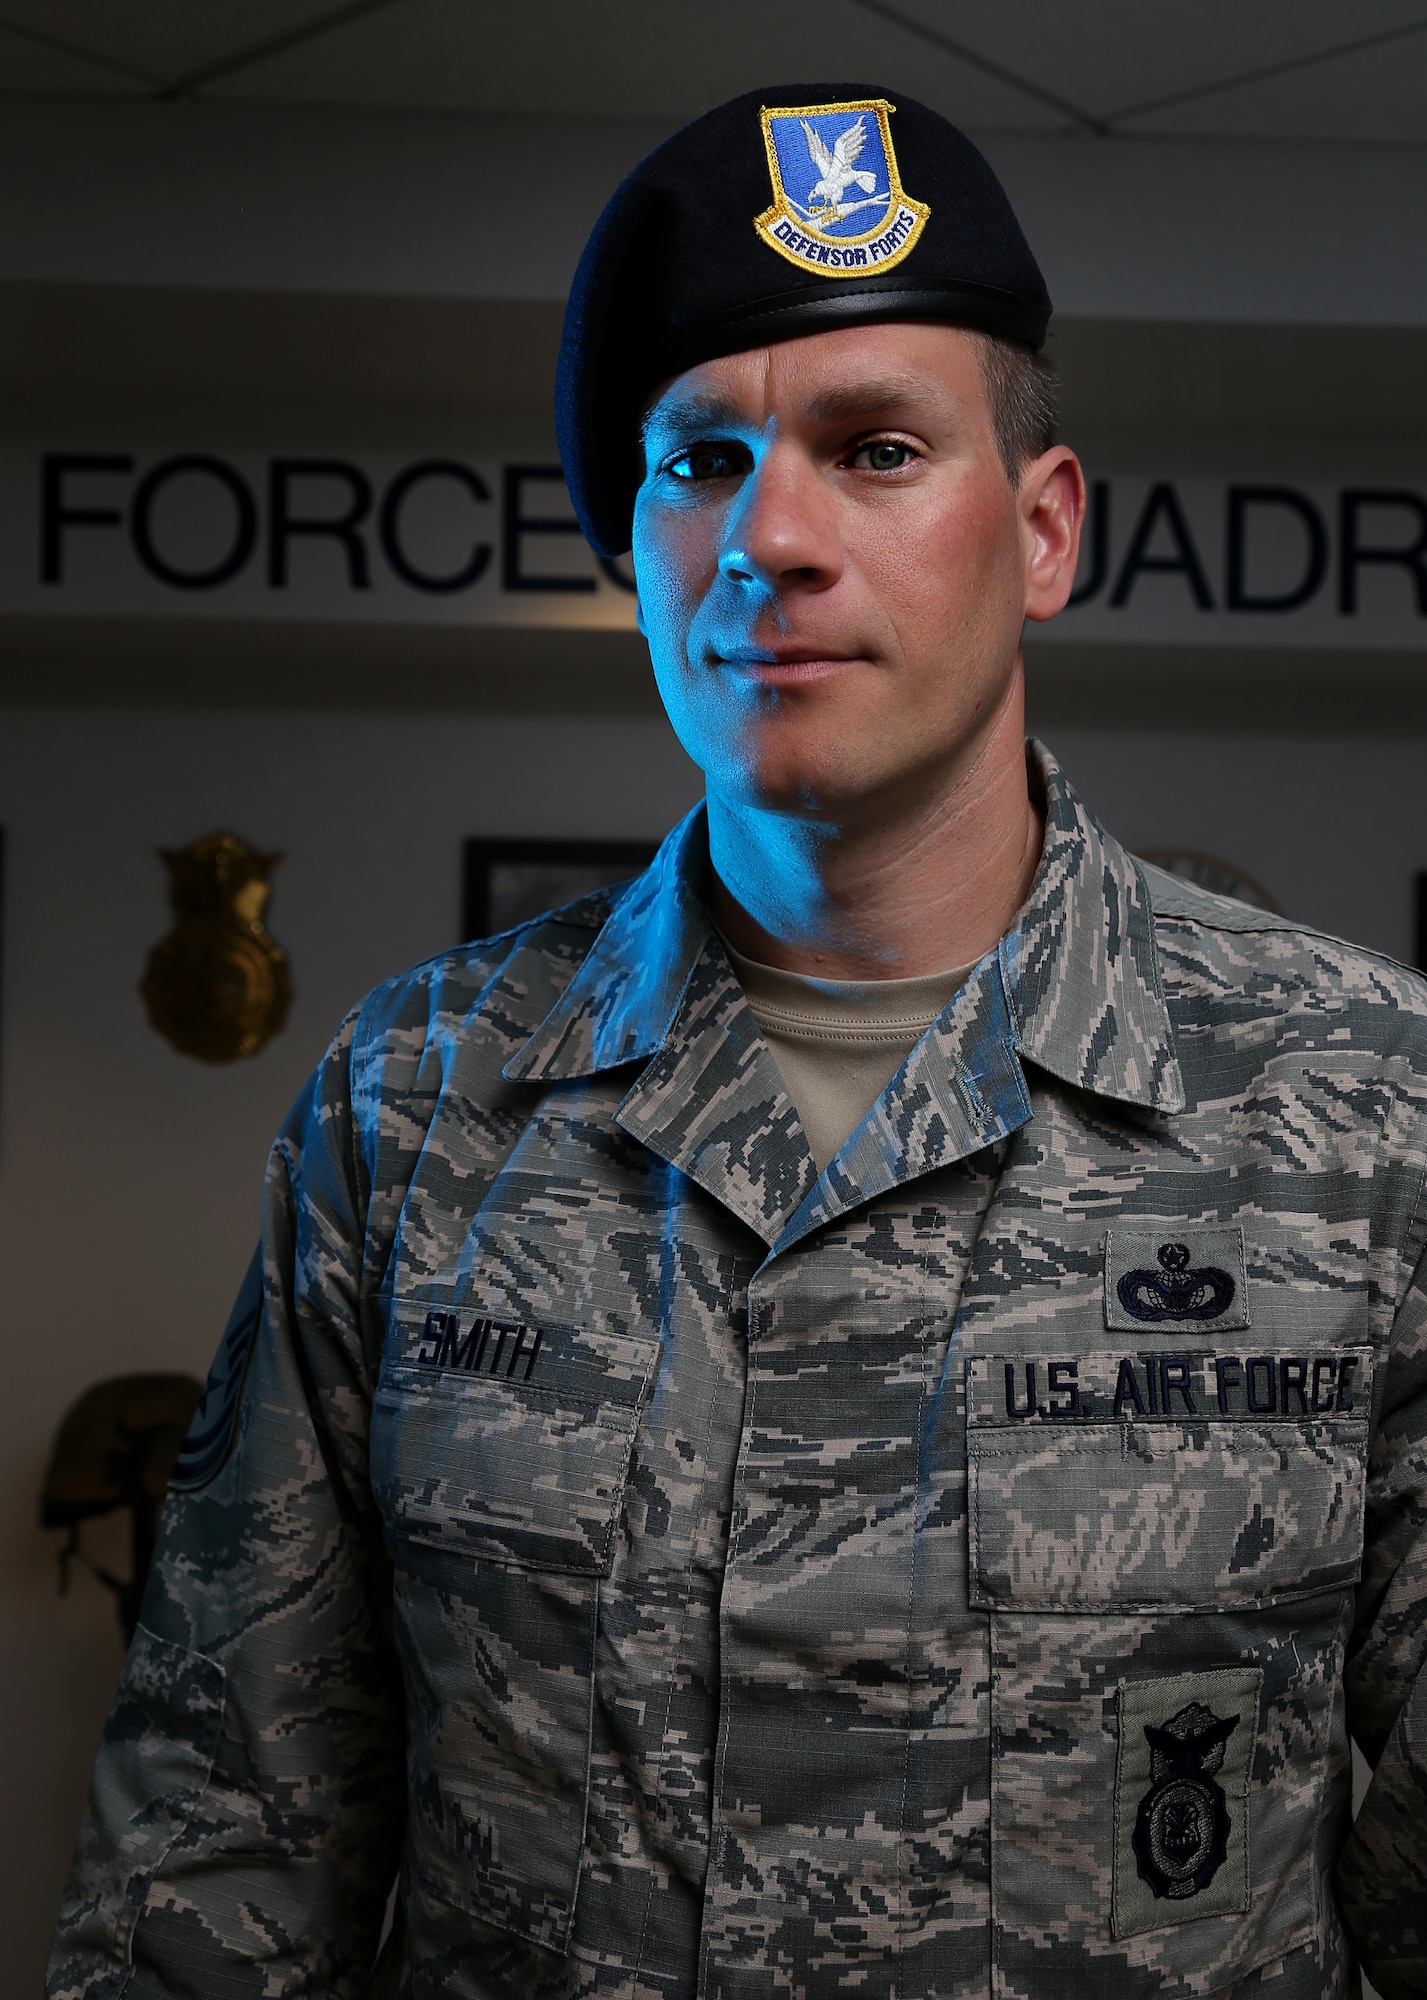 Master Sgt. Matthew A. Smith, the standards and evaluations program manager assigned to the 157th Security Forces Squadron,  poses for a portrait on May 30, 2018 at Pease Air National Guard Base, N.H. In addition to his full-time role, Smith is also responsible for educating base personnel about how to respond in the event of an active shooter or terror attack. (N.H. Air National Guard photo by Staff Sgt. Kayla White)